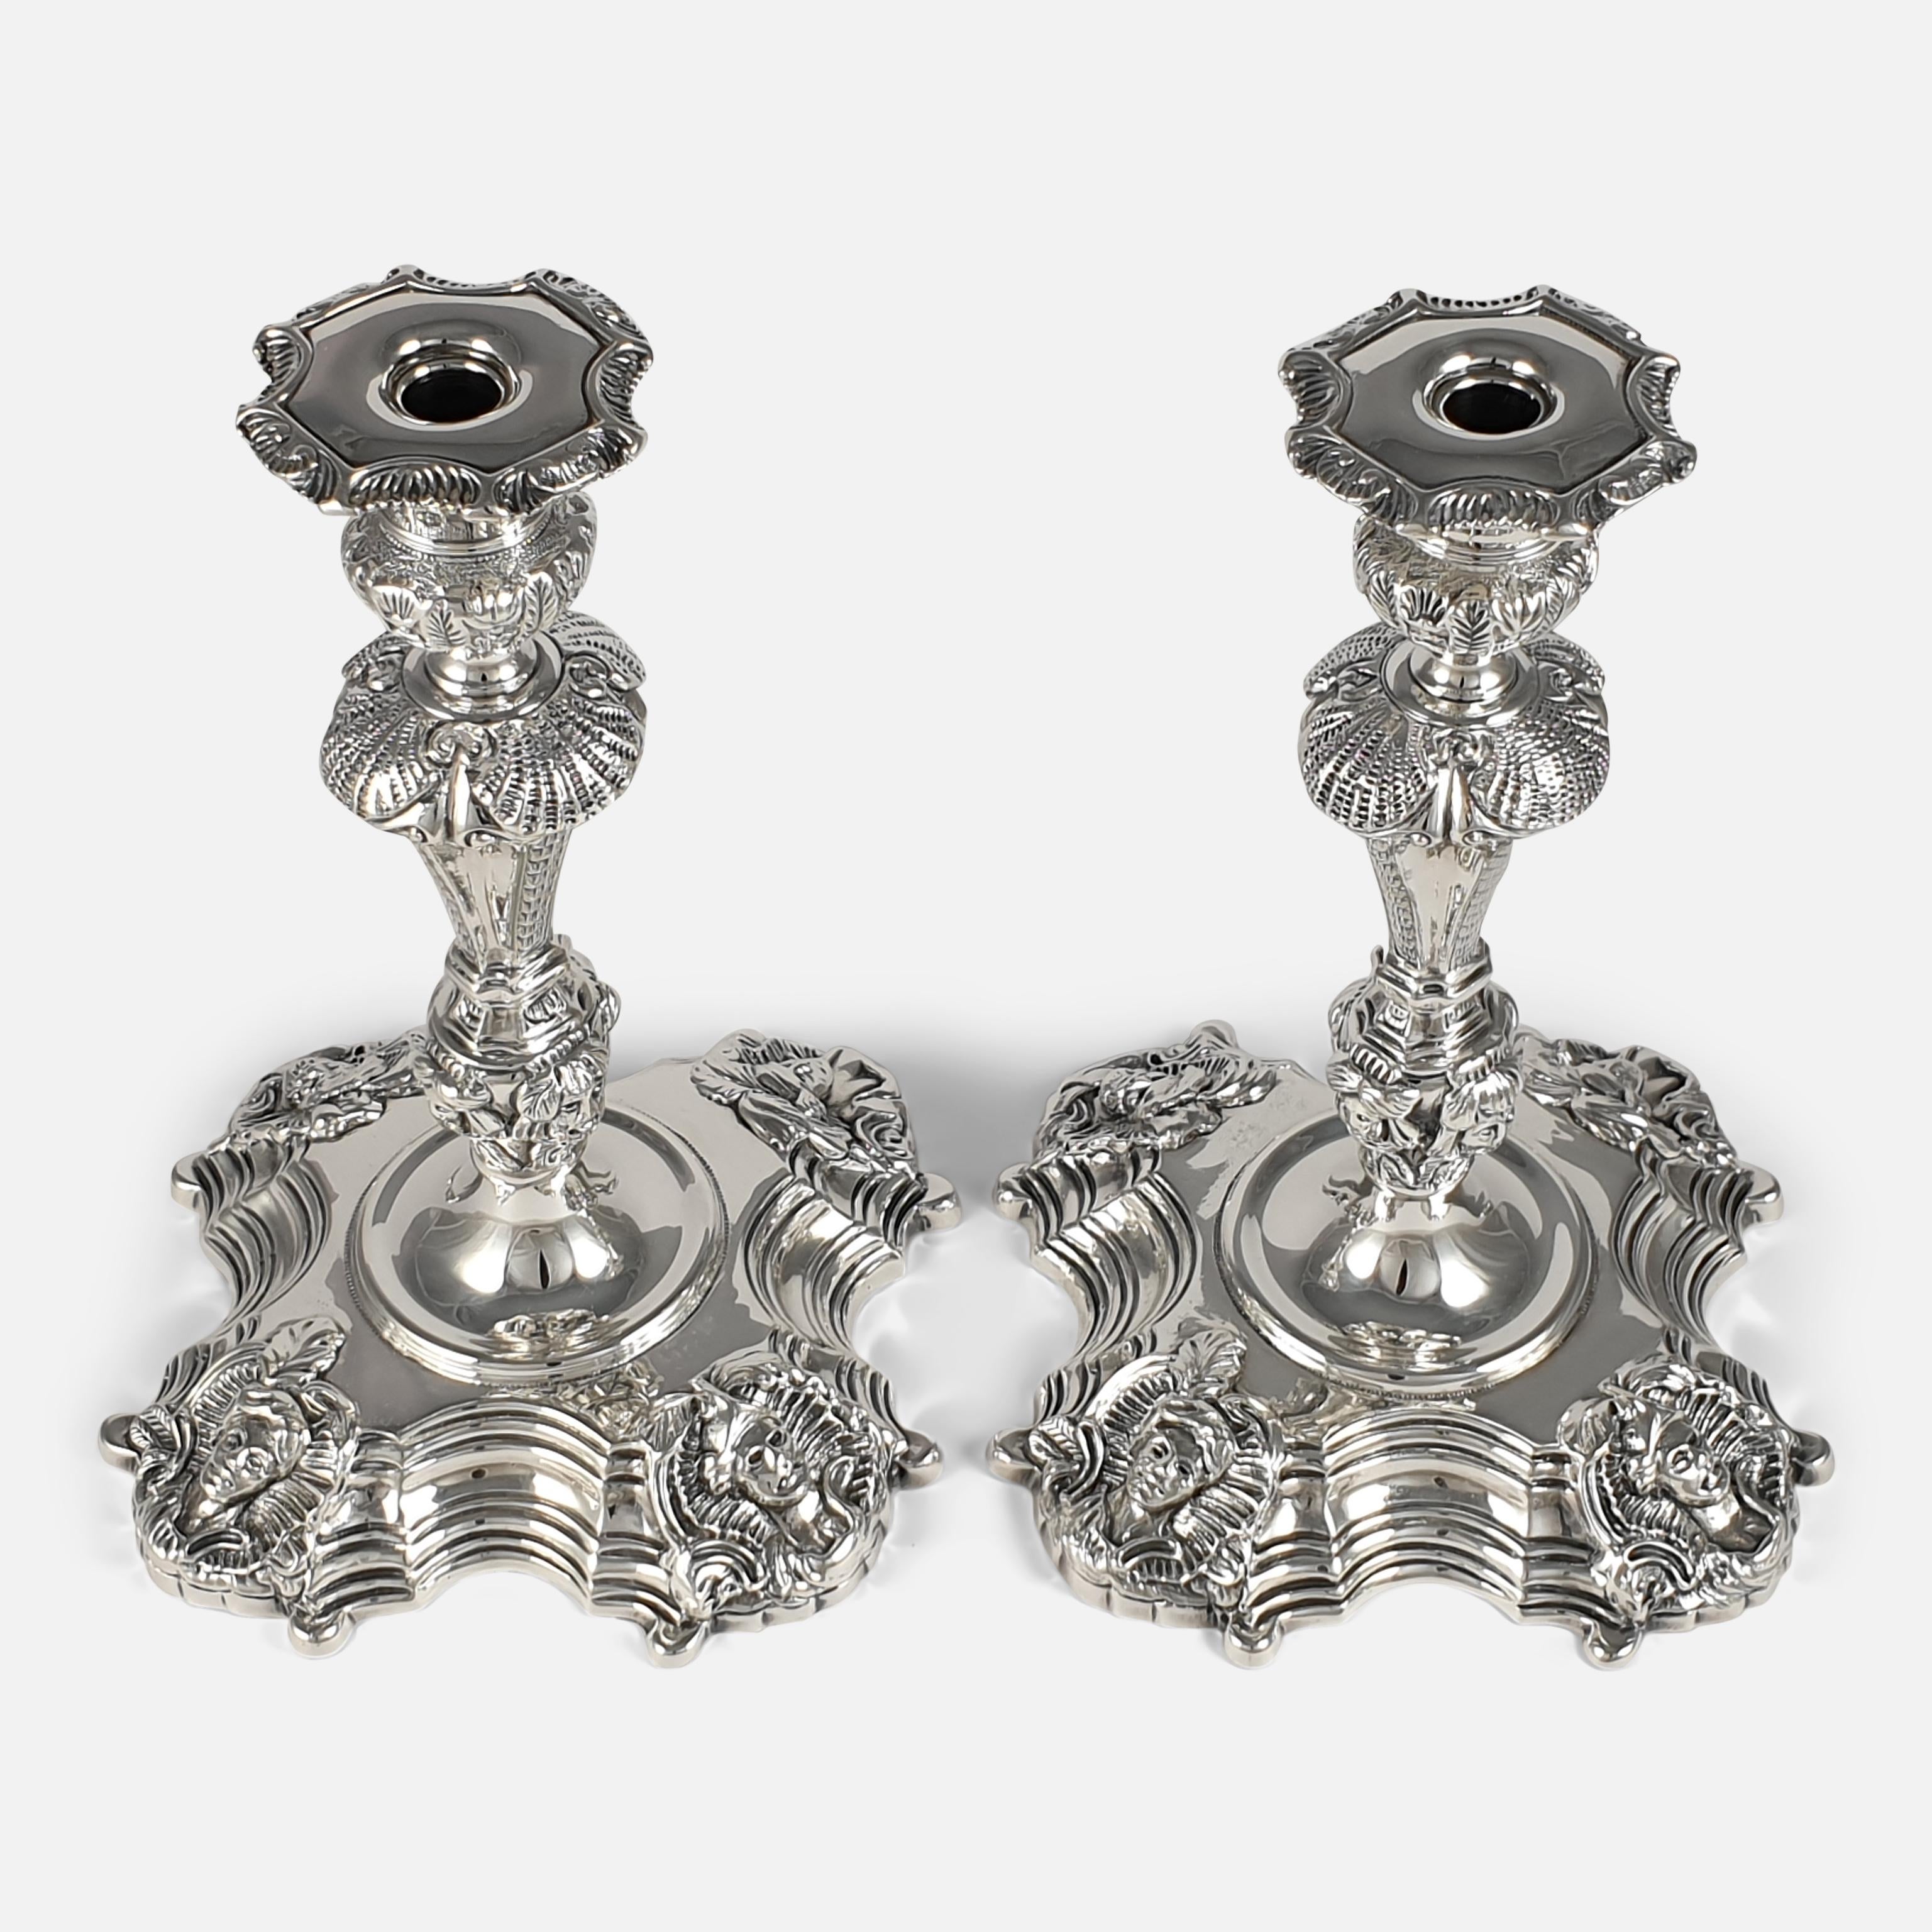 A pair of Irish cast sterling silver candlesticks by Royal Irish Silver Ltd, Dublin 1969, with import marks for The Sheffield Assay Office. The ornate candlesticks are of baluster shaped form, having detailed foliate work to the nozzles and upper